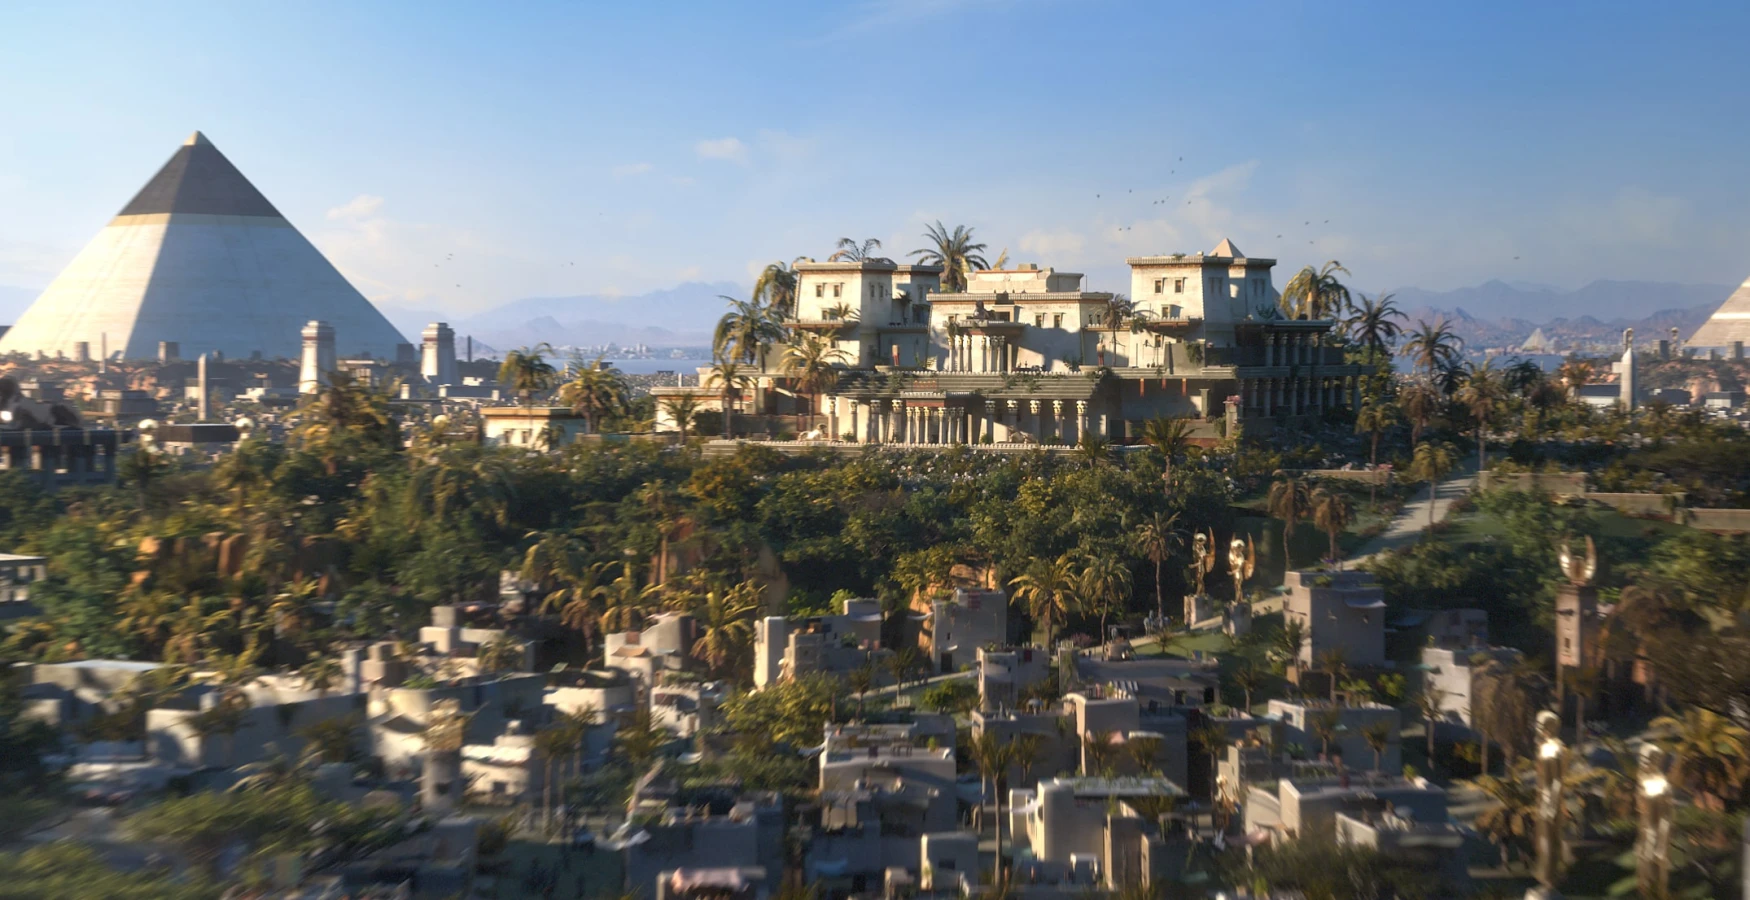  Gods of Egypt city view with pyramid from Raynault vfx 